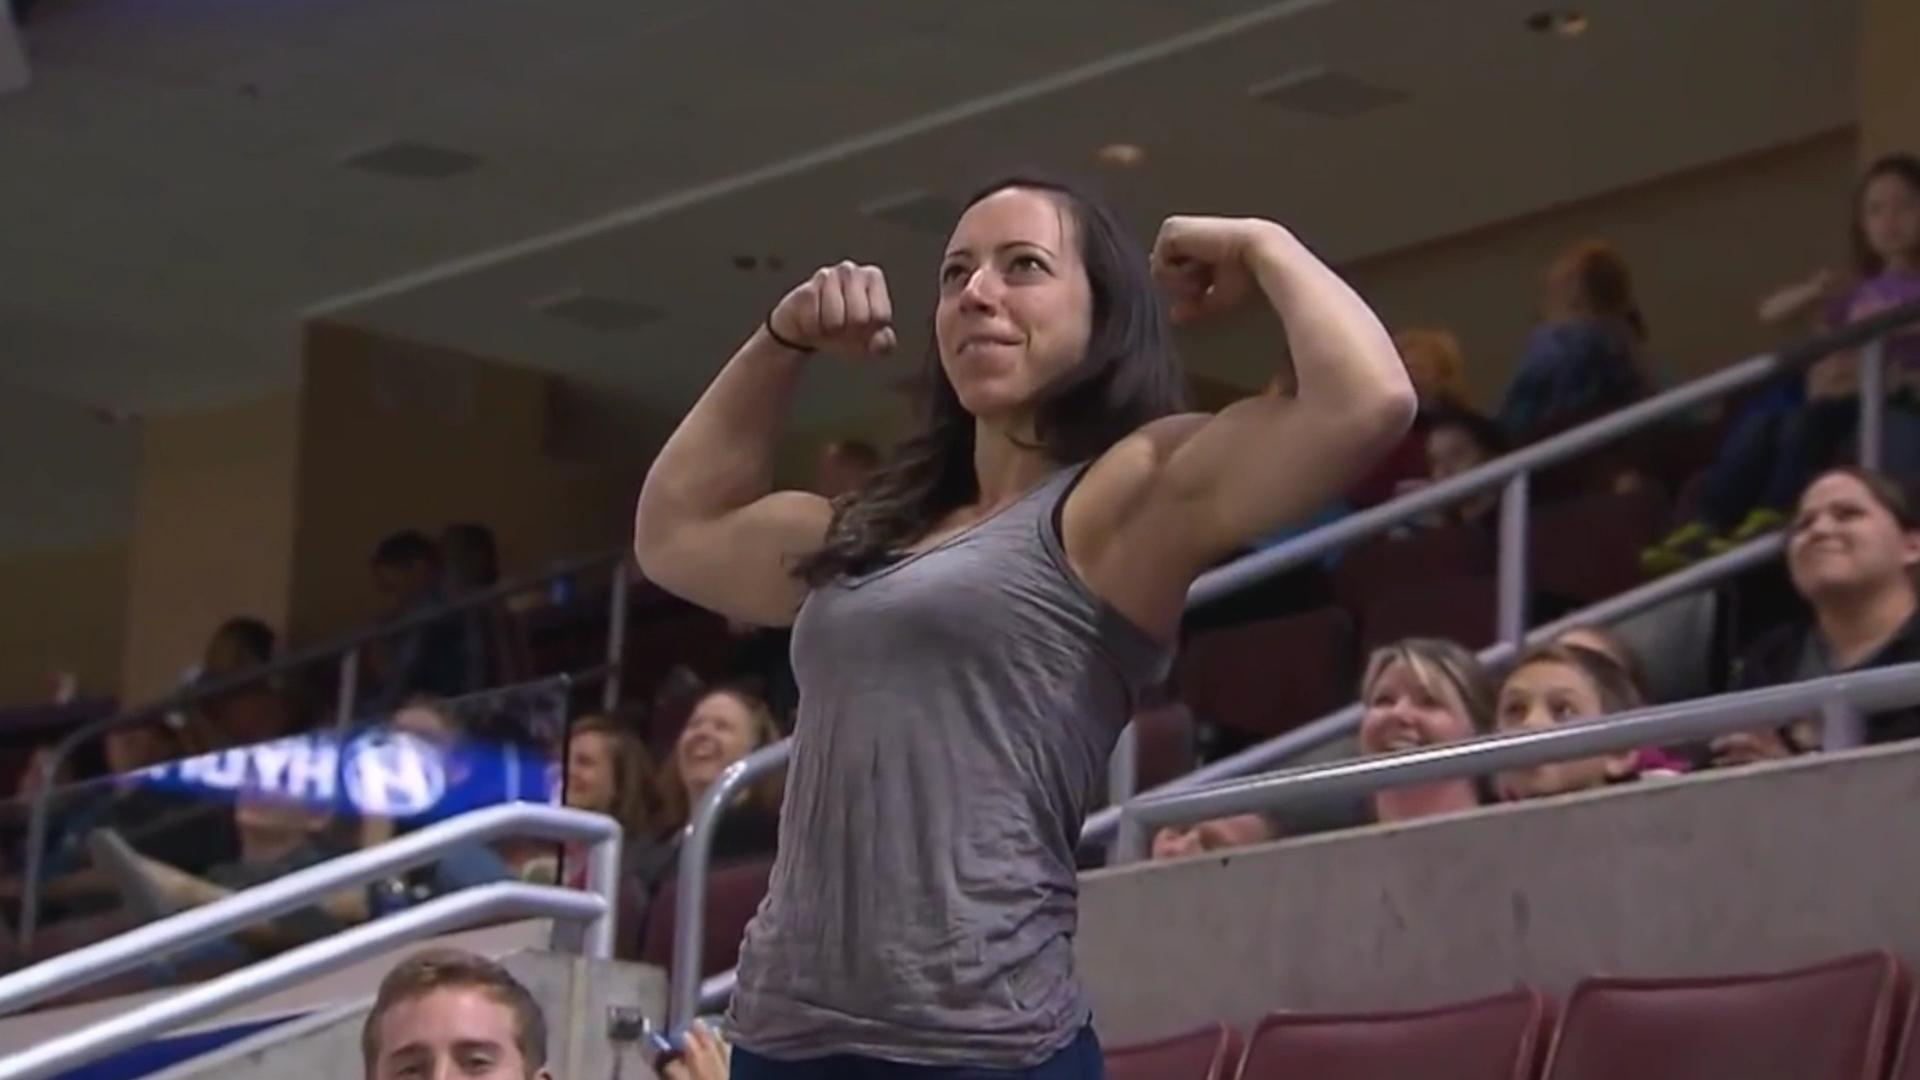 her bicep cam